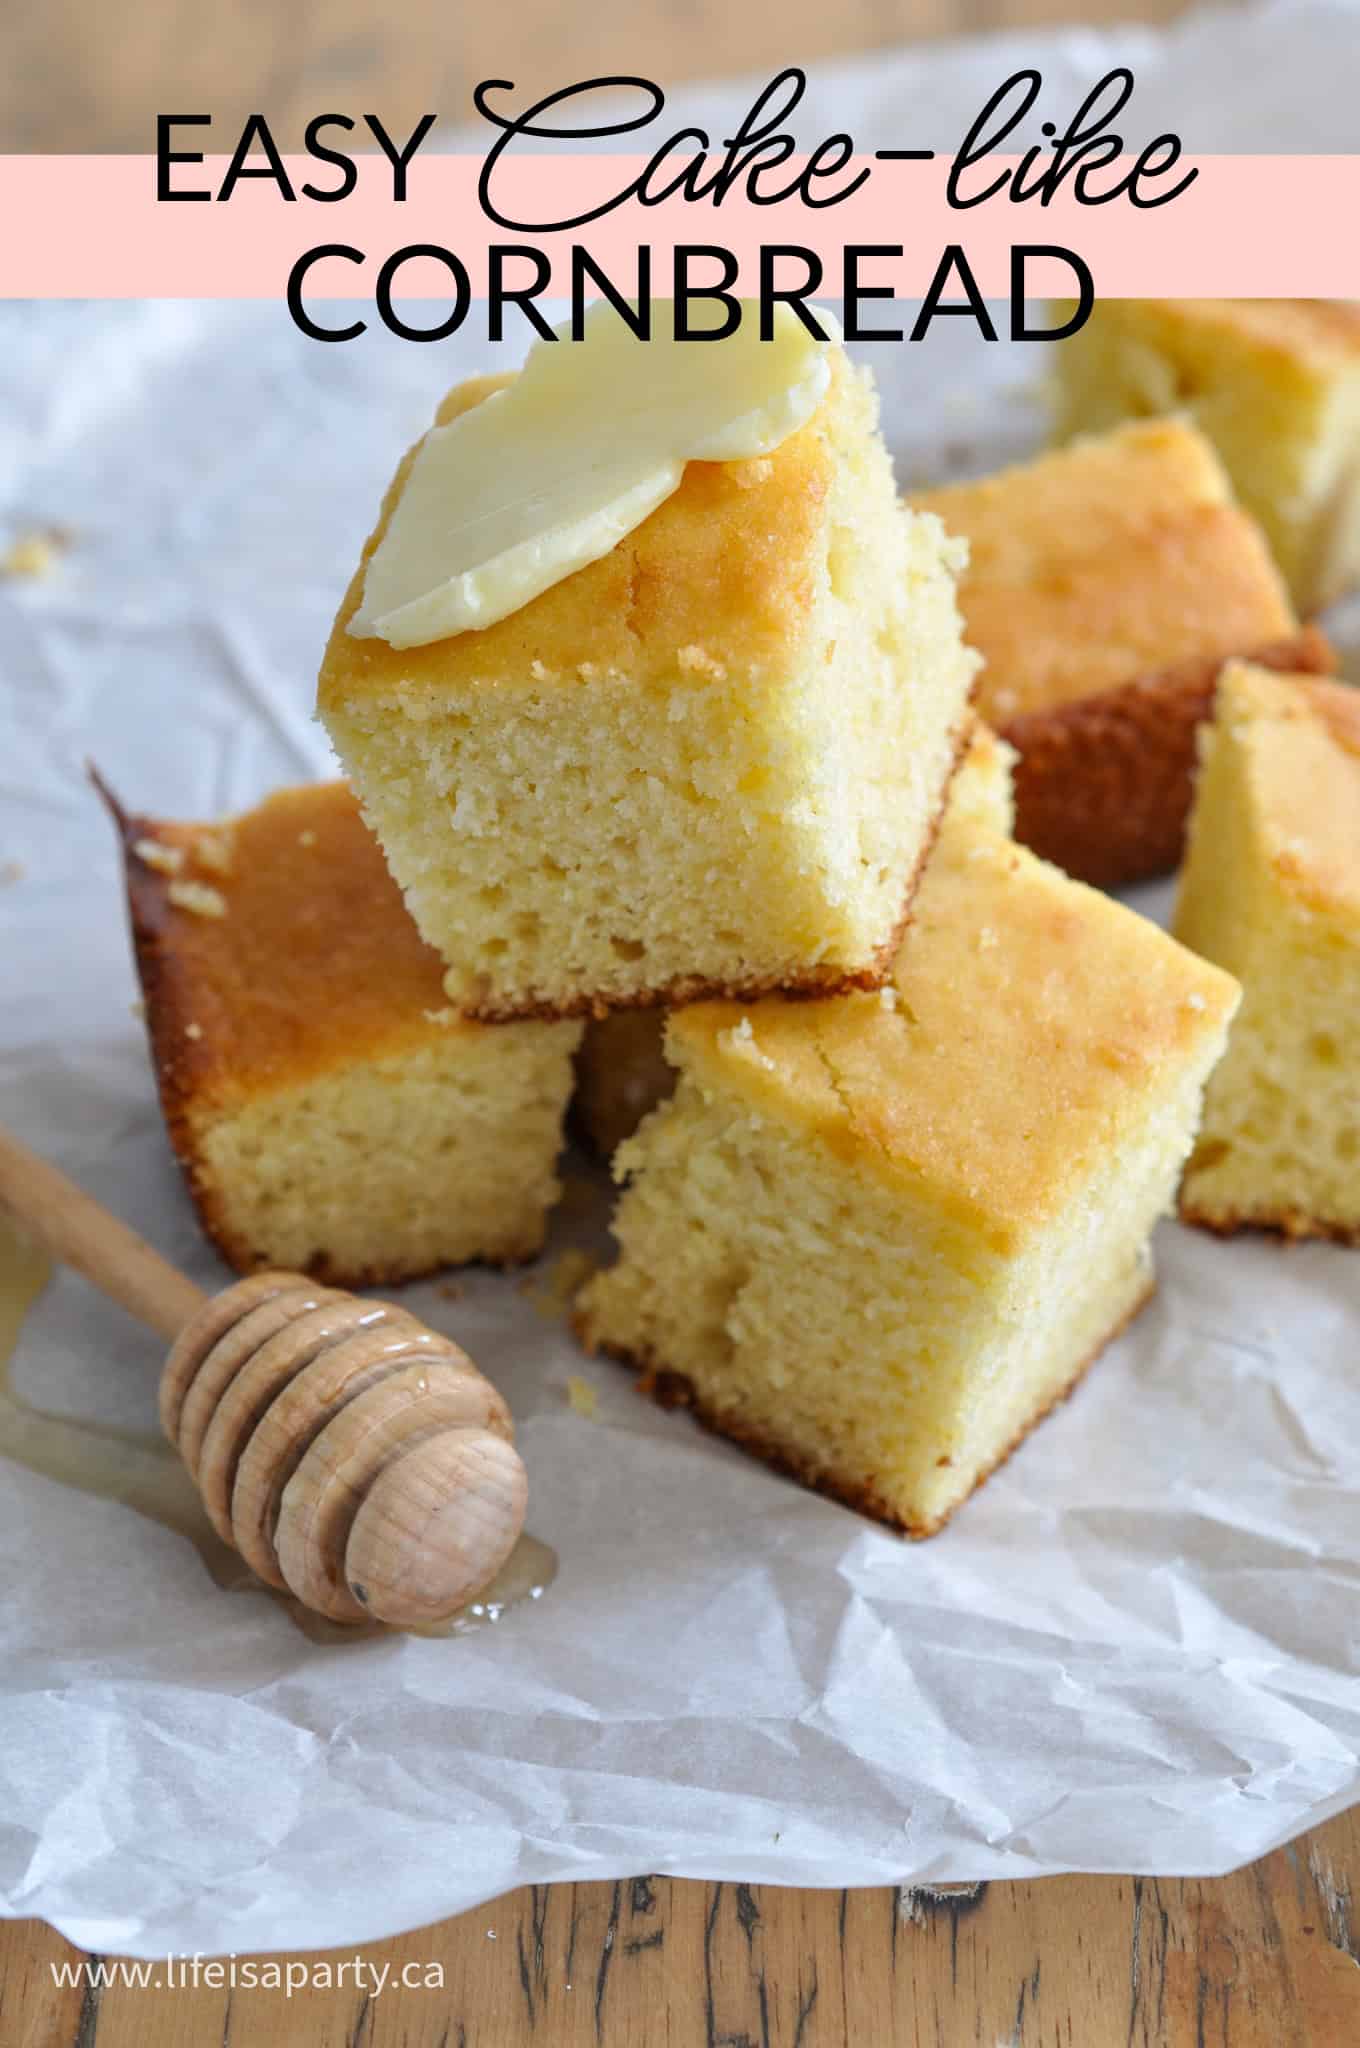 How to make sweet cake like cornbread from scratch.